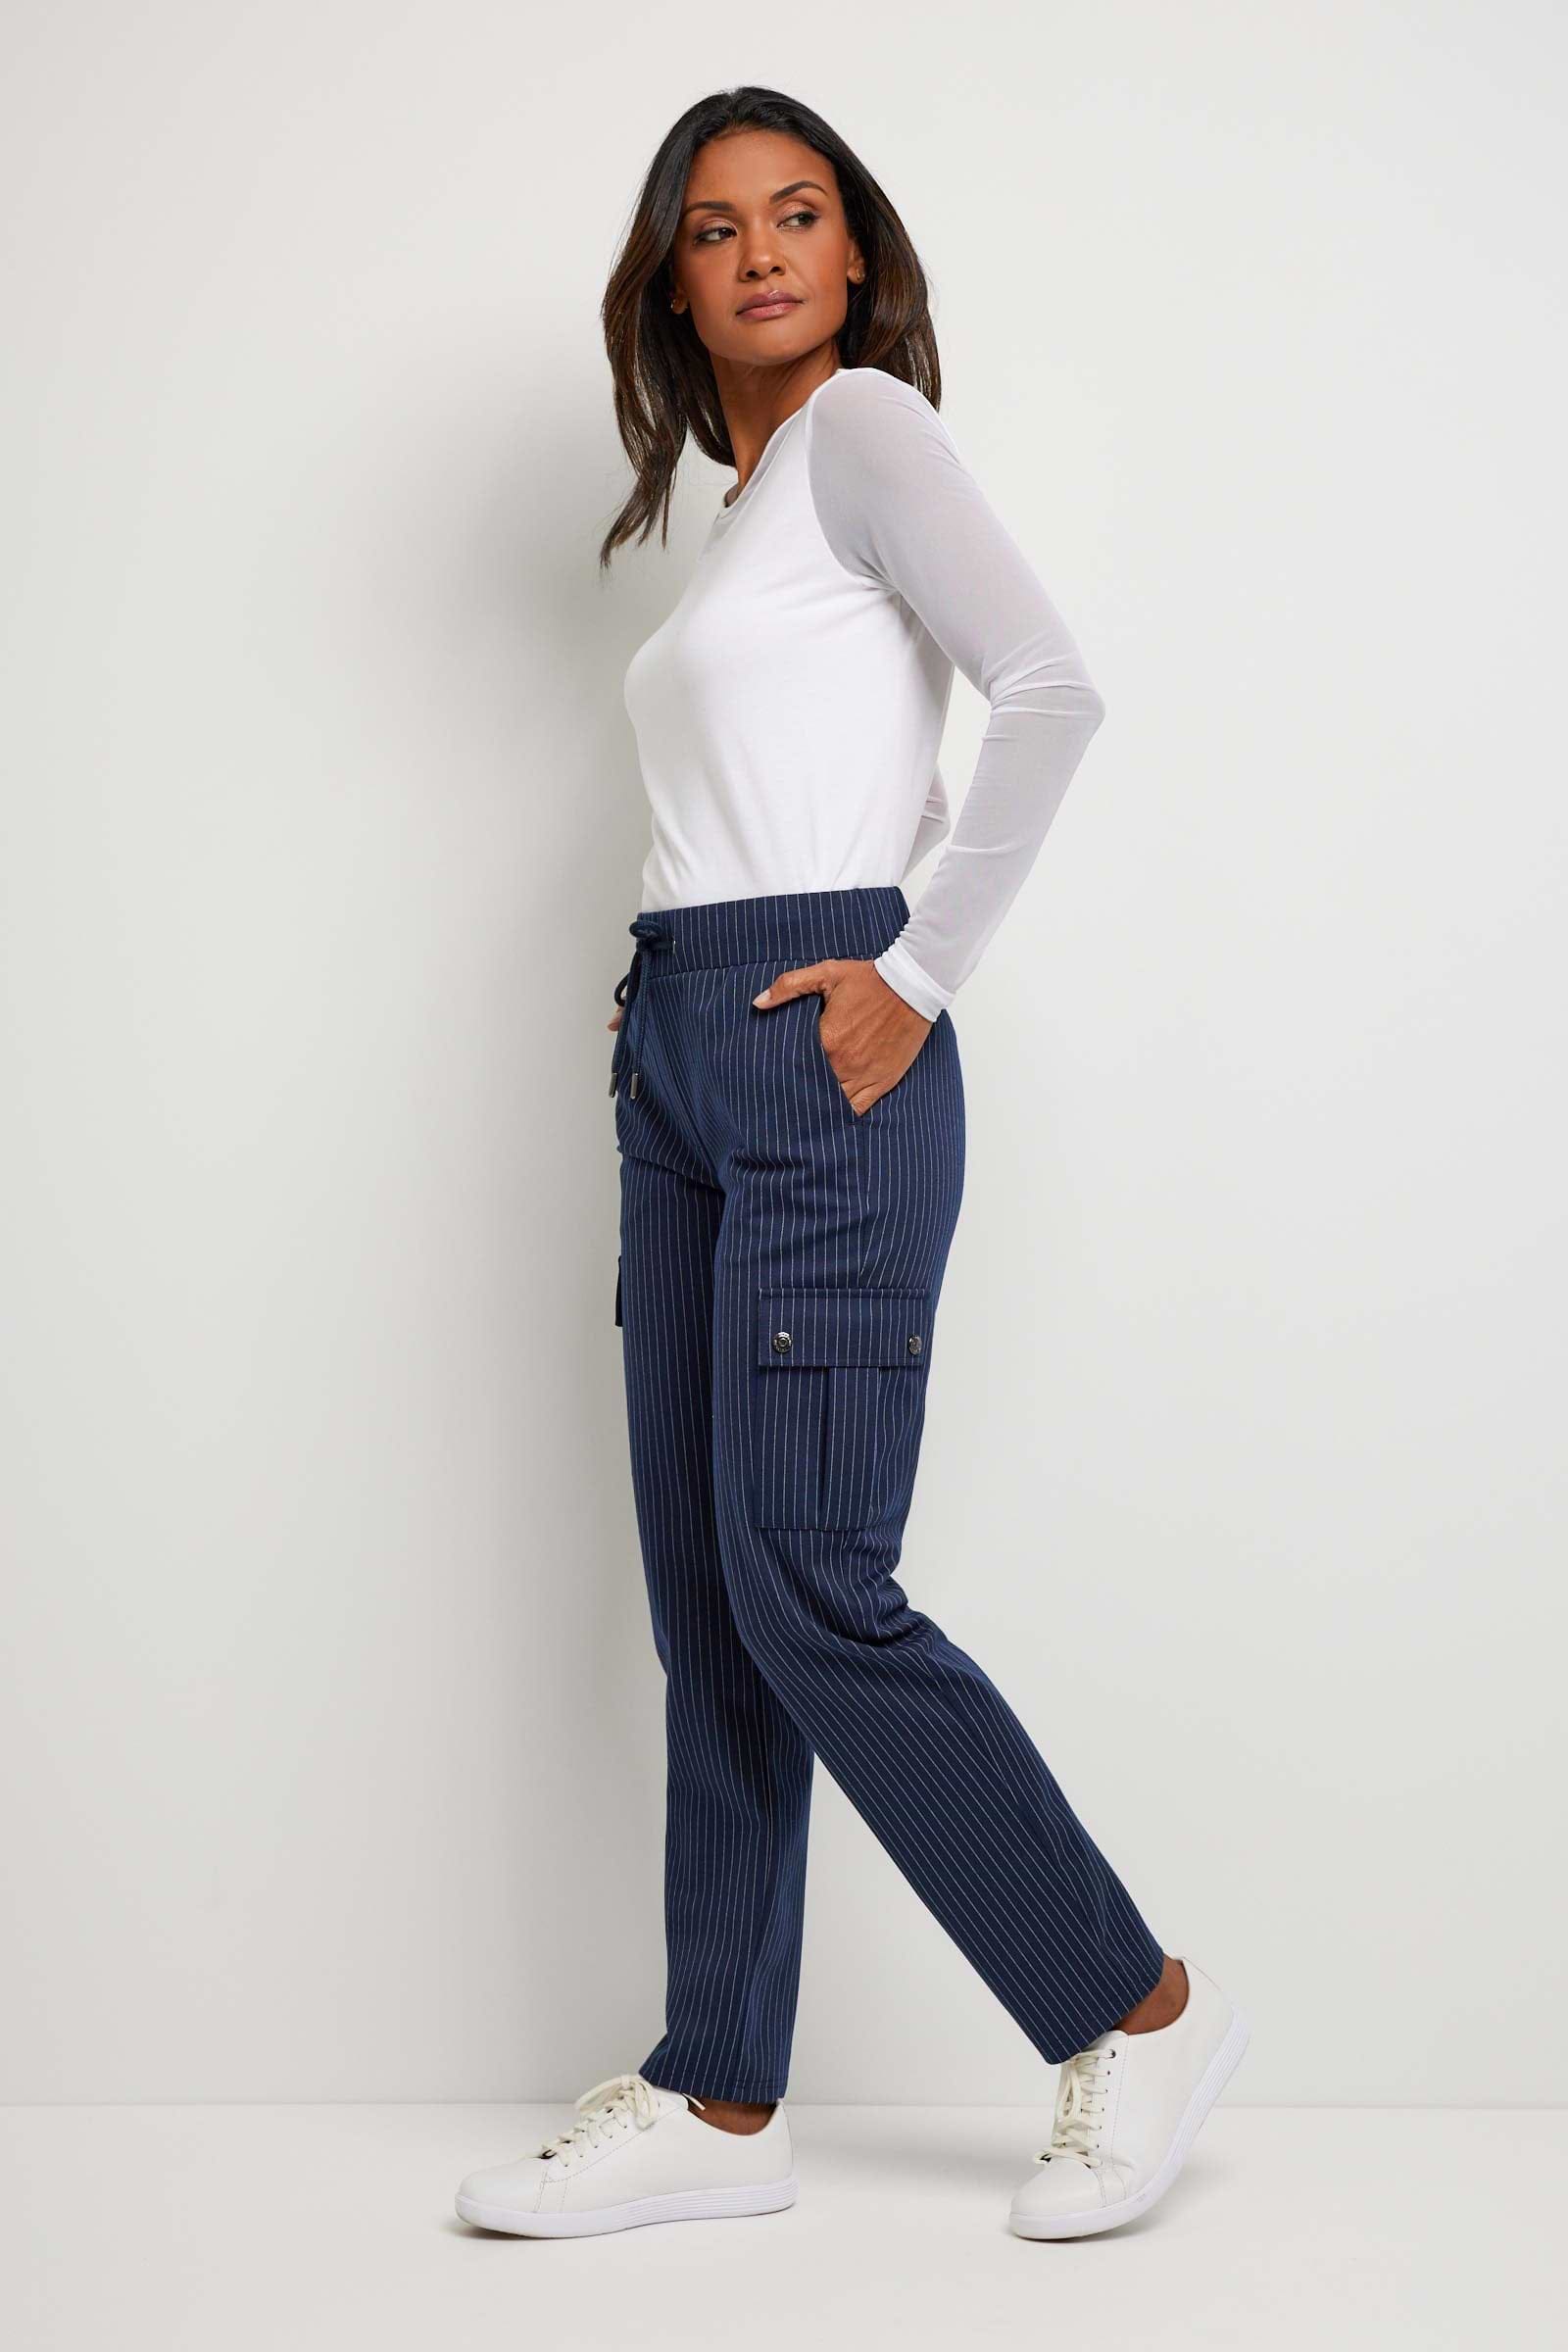 The Best Travel Pant. Woman Showing the Side Profile of an Indie Pant in Navy/White.